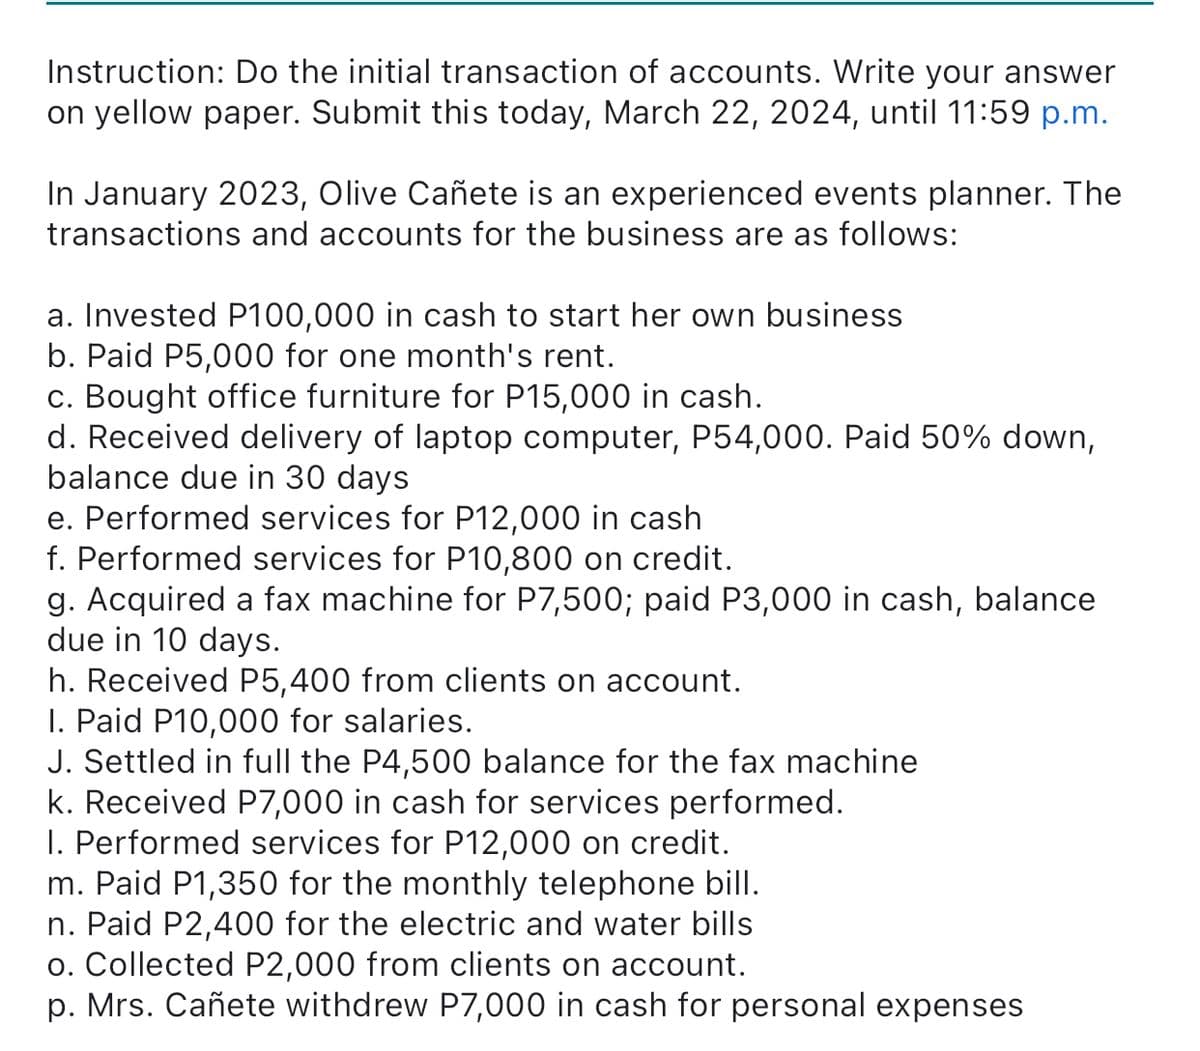 Instruction: Do the initial transaction of accounts. Write your answer
on yellow paper. Submit this today, March 22, 2024, until 11:59 p.m.
In January 2023, Olive Cañete is an experienced events planner. The
transactions and accounts for the business are as follows:
a. Invested P100,000 in cash to start her own business
b. Paid P5,000 for one month's rent.
c. Bought office furniture for P15,000 in cash.
d. Received delivery of laptop computer, P54,000. Paid 50% down,
balance due in 30 days
e. Performed services for P12,000 in cash
f. Performed services for P10,800 on credit.
g. Acquired a fax machine for P7,500; paid P3,000 in cash, balance
due in 10 days.
h. Received P5,400 from clients on account.
I. Paid P10,000 for salaries.
J. Settled in full the P4,500 balance for the fax machine
k. Received P7,000 in cash for services performed.
I. Performed services for P12,000 on credit.
m. Paid P1,350 for the monthly telephone bill.
n. Paid P2,400 for the electric and water bills
o. Collected P2,000 from clients on account.
p. Mrs. Cañete withdrew P7,000 in cash for personal expenses